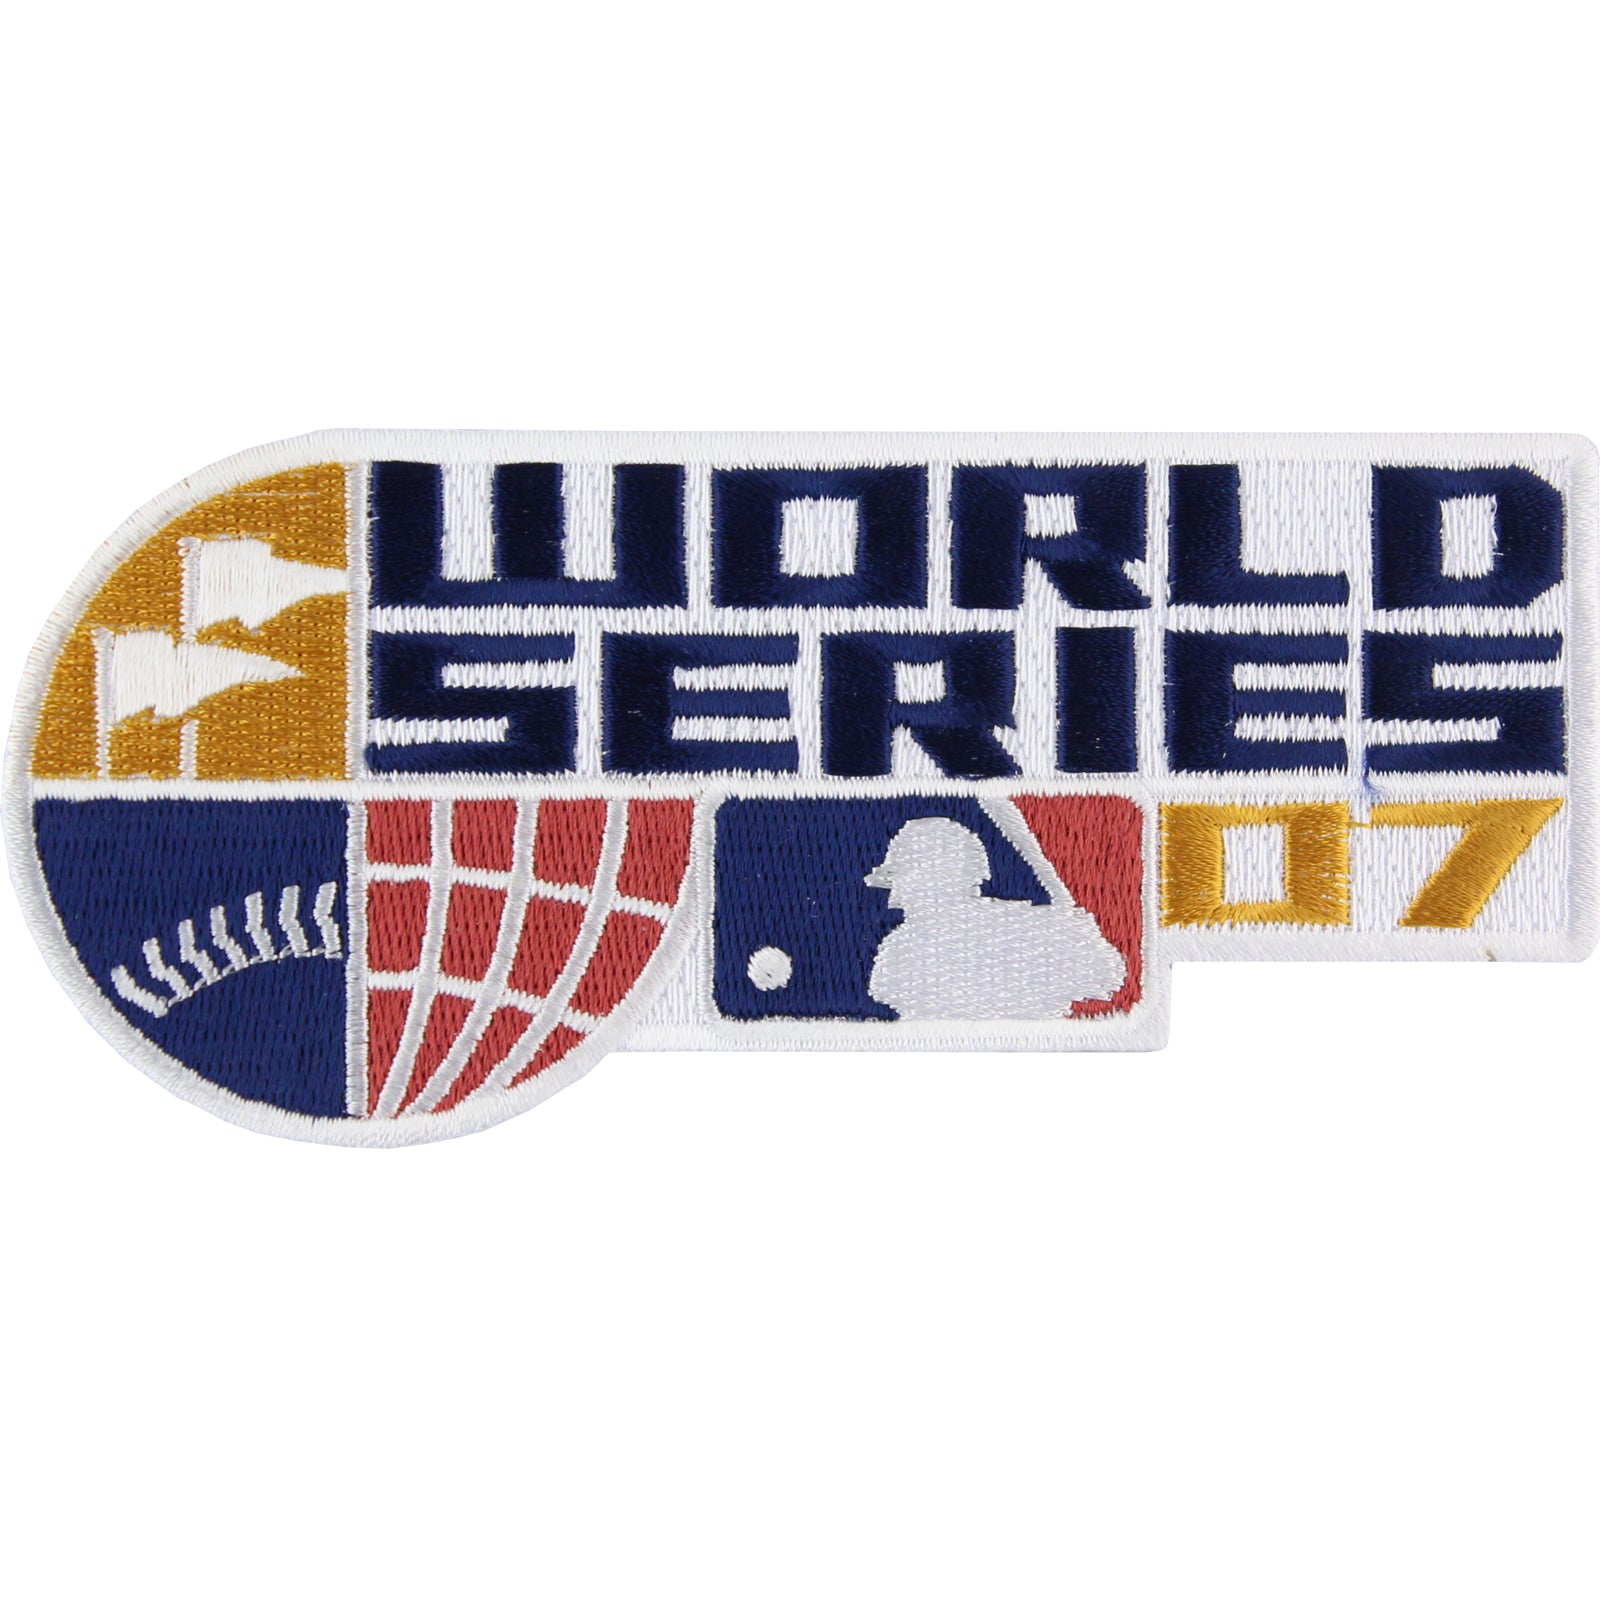 107 World Series Patch Stock Photos, High-Res Pictures, and Images